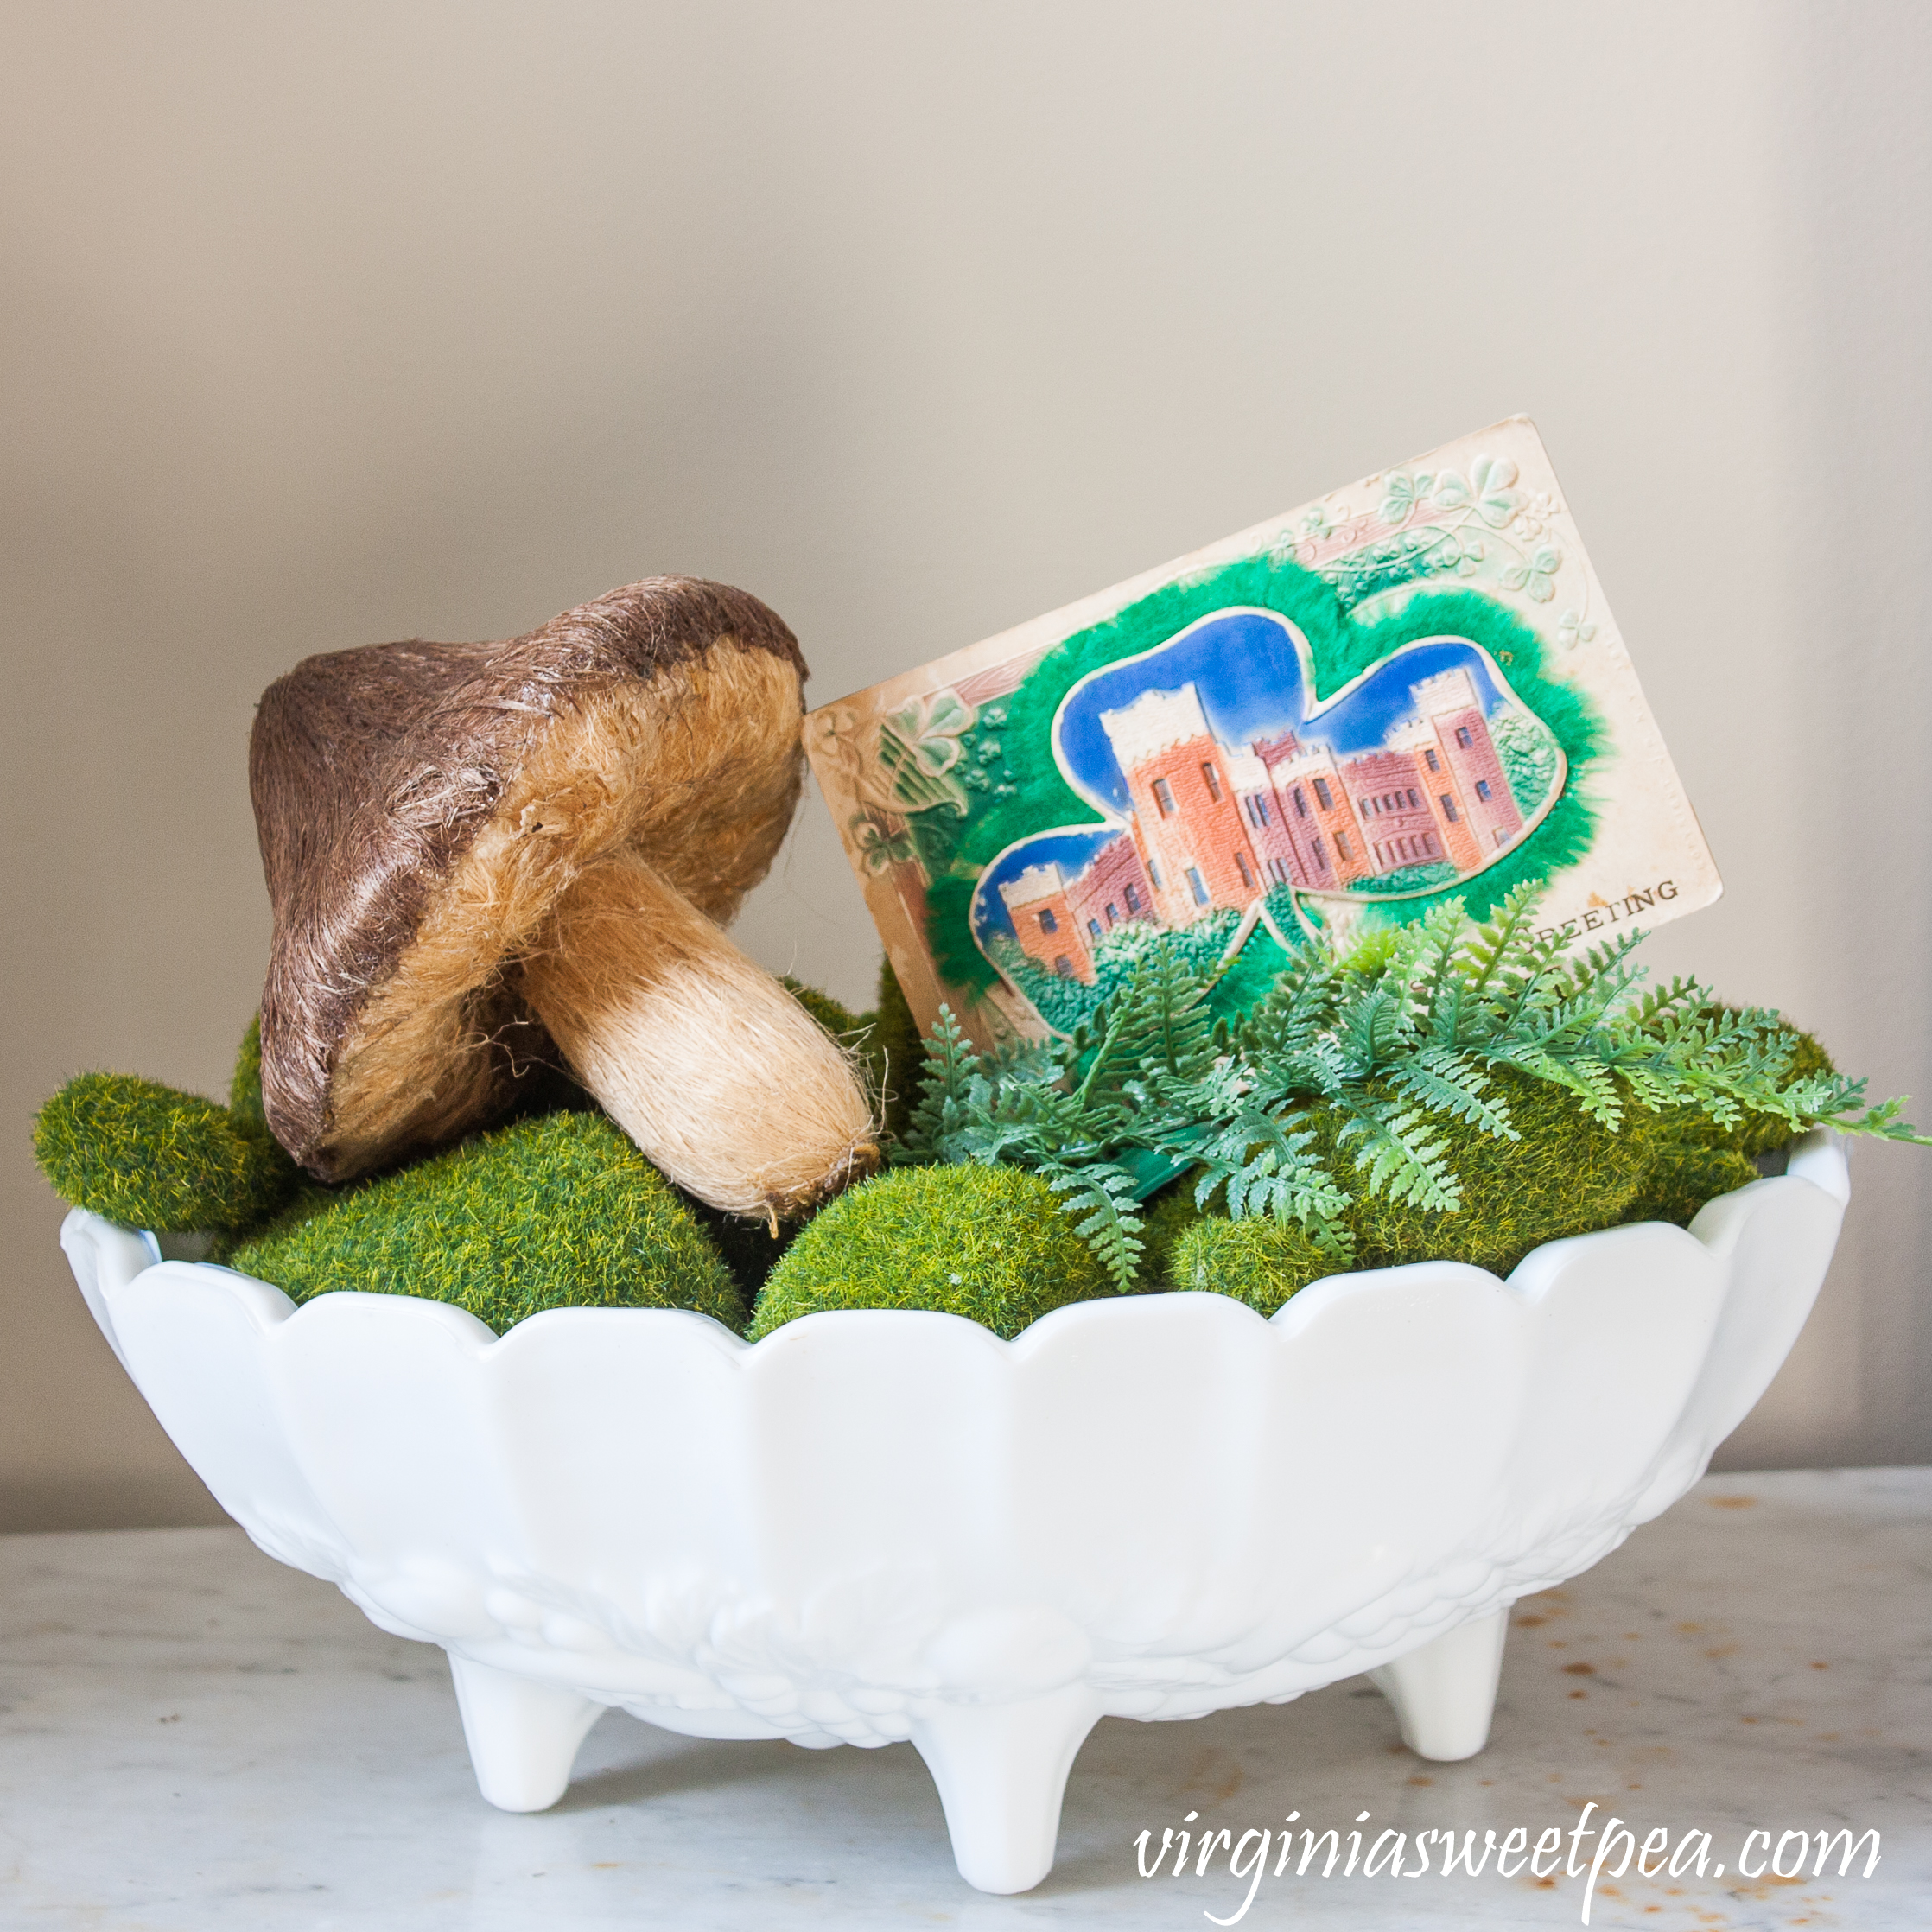 St. Patrick's Day vignette in a milk glass compote with faux moss stones, a faux mushroom, and a vintage St. Patrick's Day postcard. #stpatricksday #stpatricksdaydecor #vintagedecor